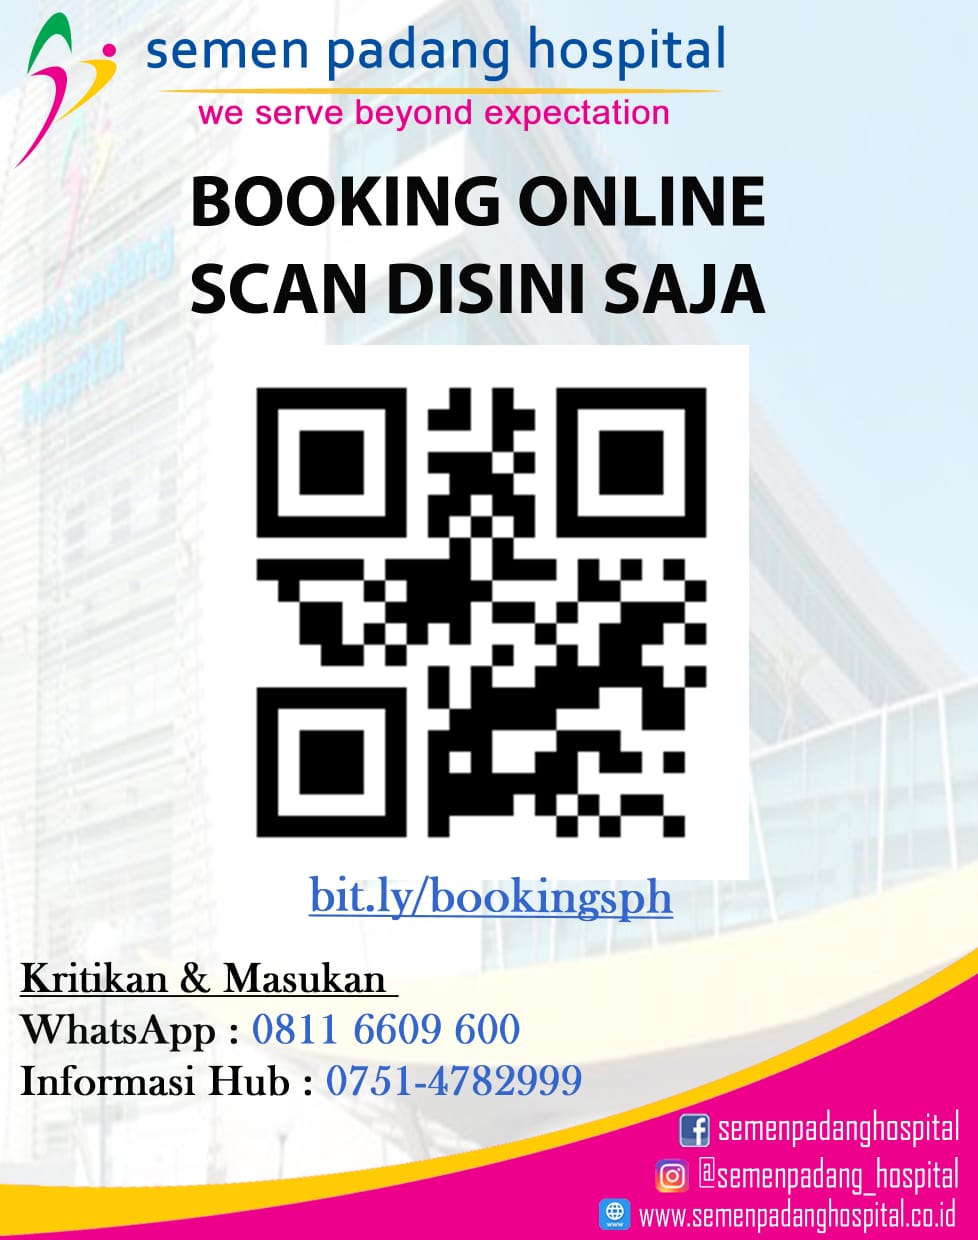 Booking online SPH